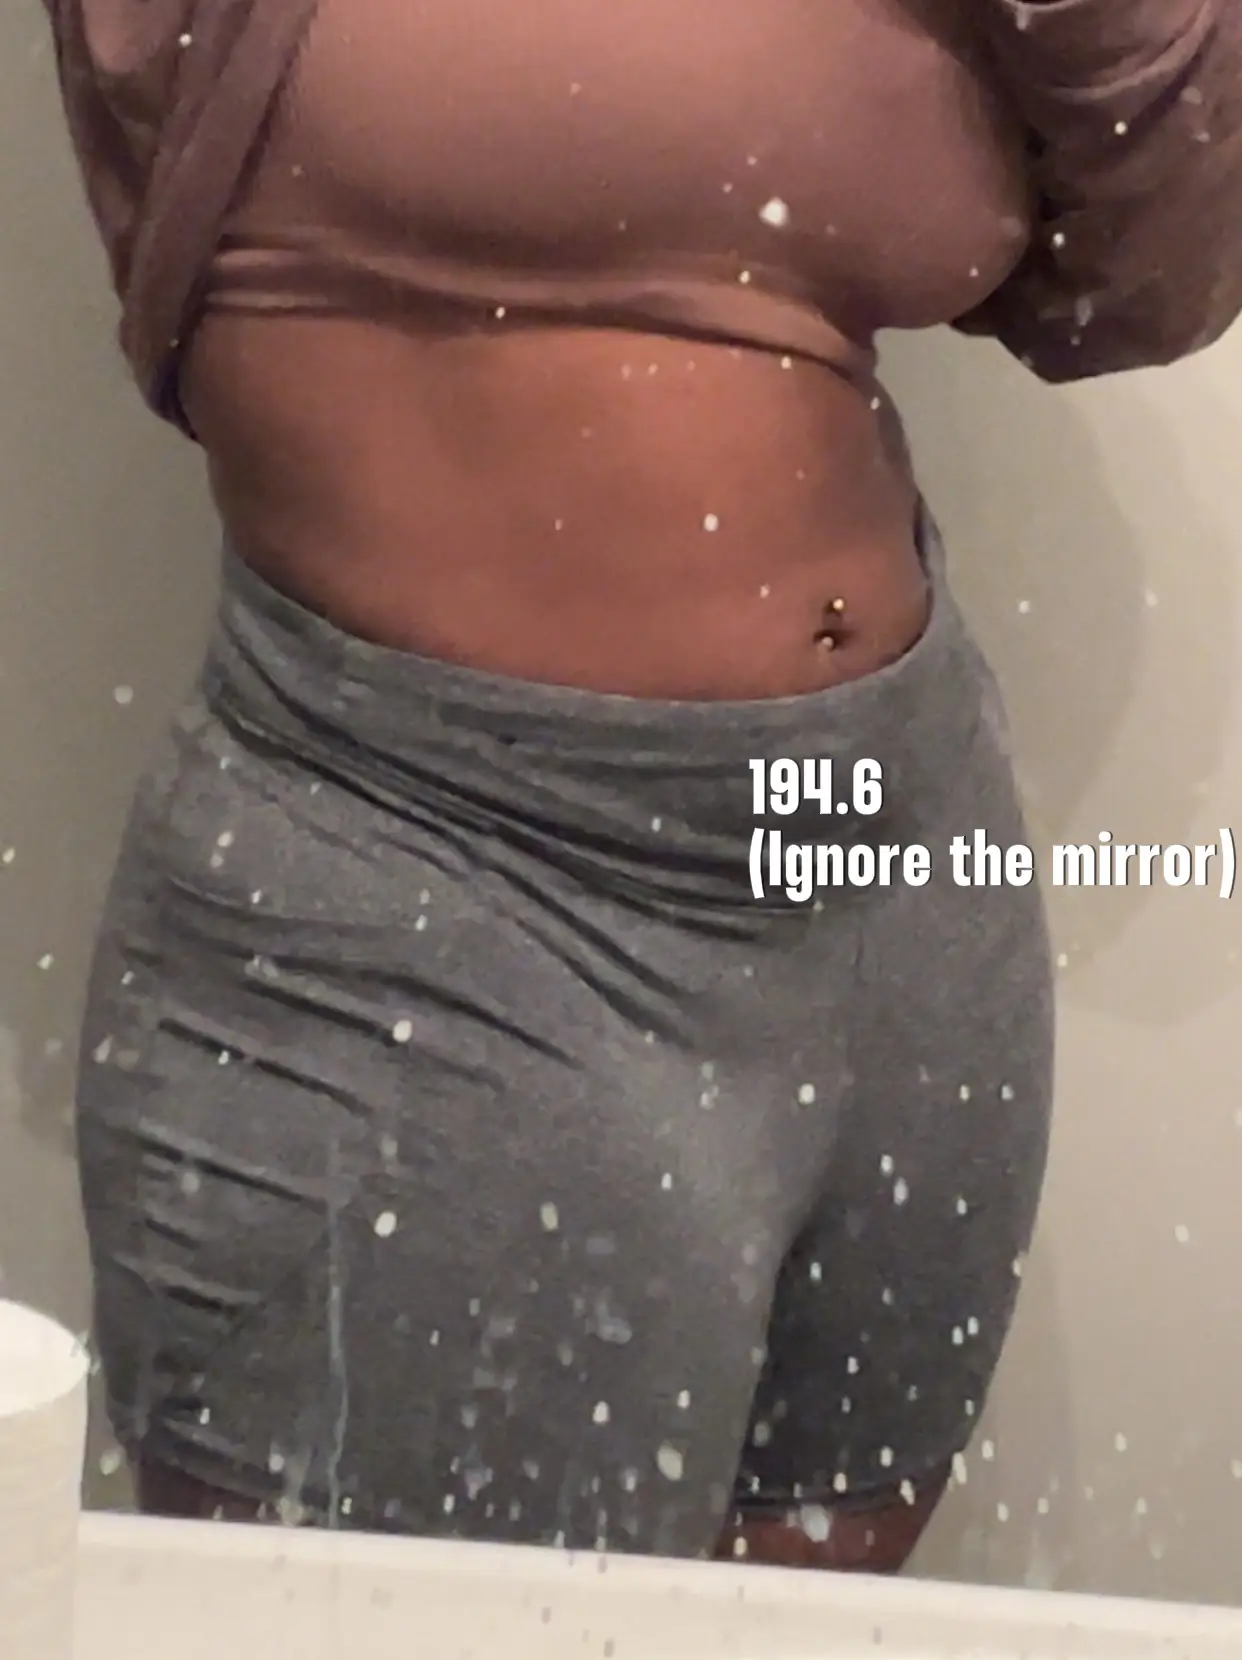 Front Butt/Mothers Apron before and after?? — MyFitnessPal.com